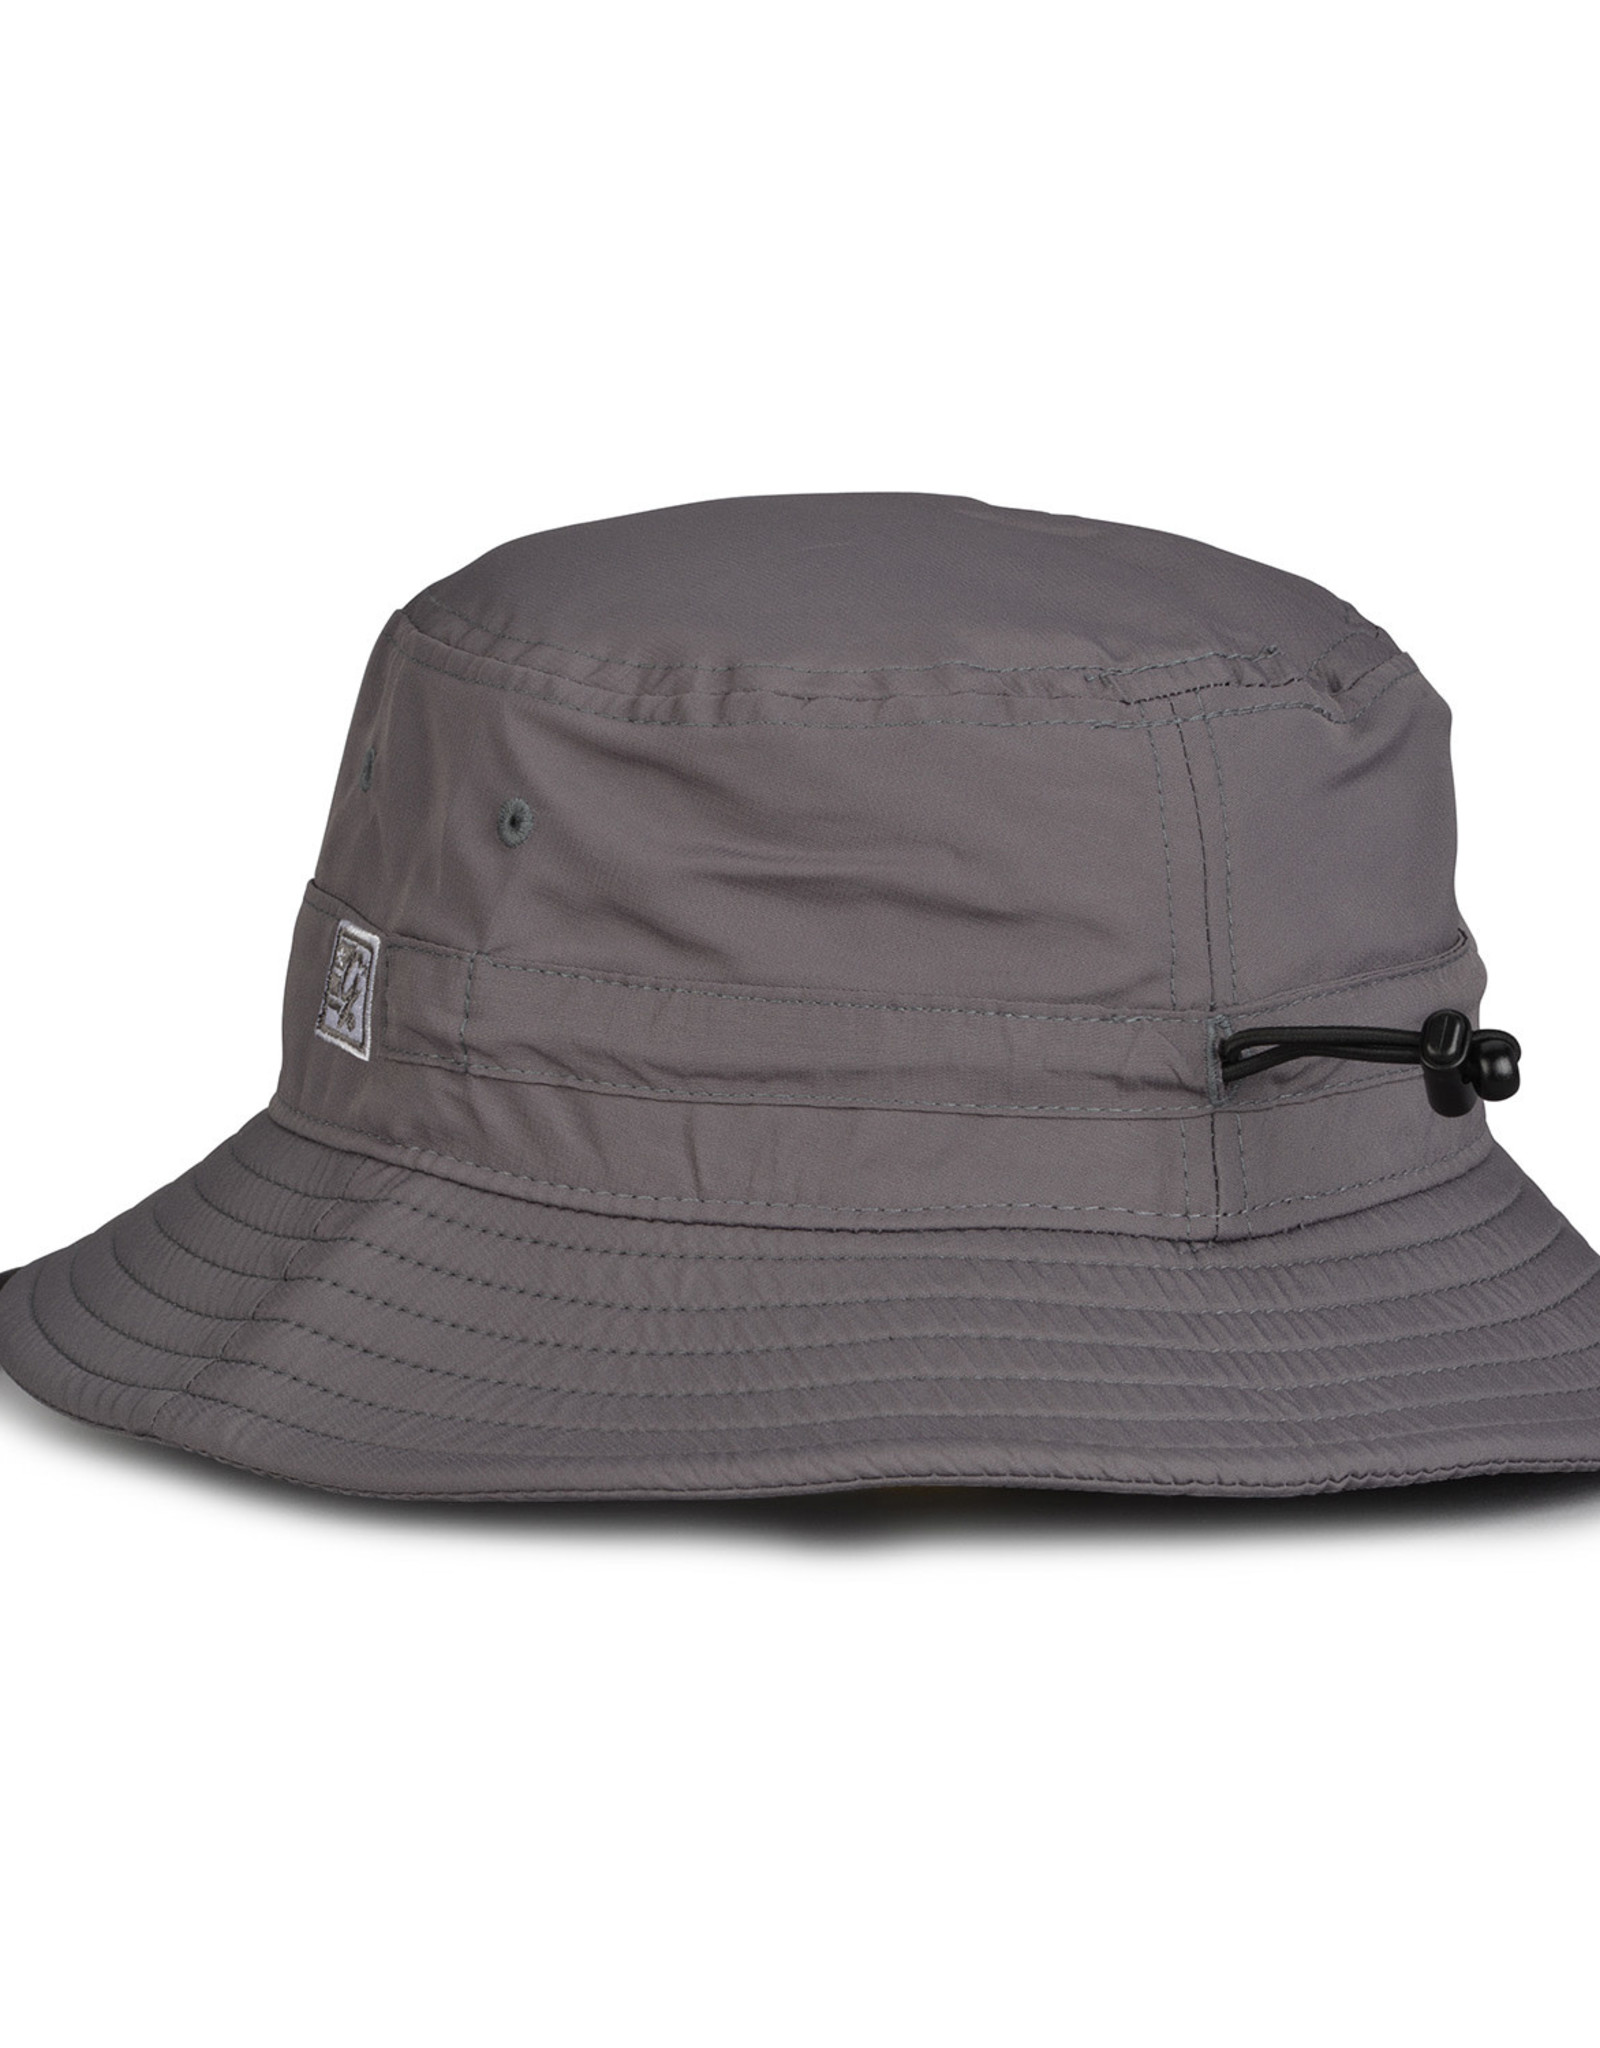 GAME The Game Bucket Hat